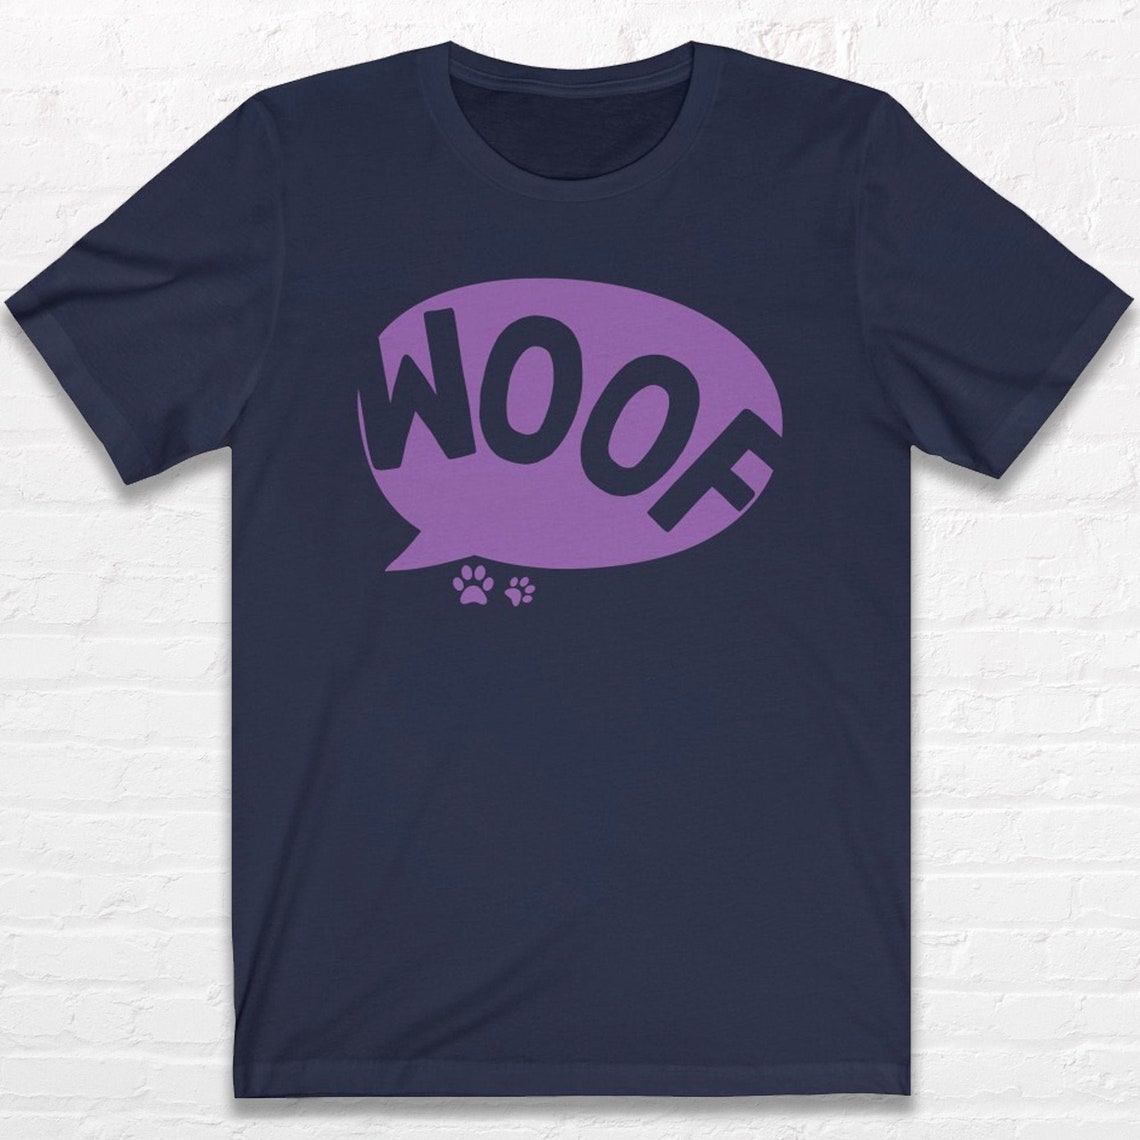 Cute Dog T-shirt, Woof, Dog Lover, Girlfriend Gift, Gift for Her ...